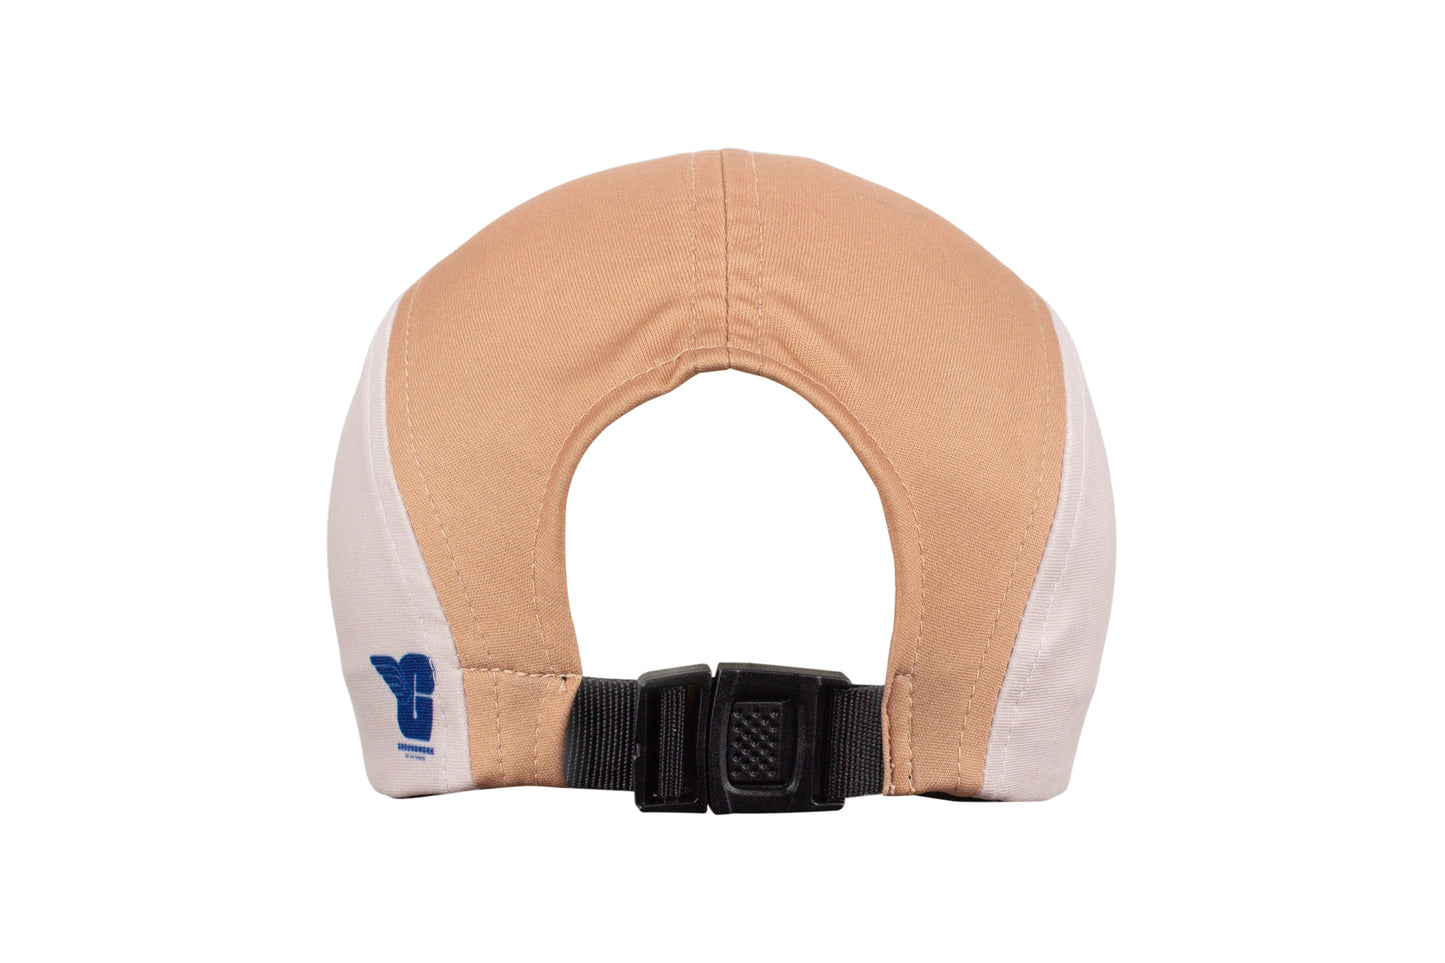 GWxMTH 5-Panel Cycling cap (Pale)